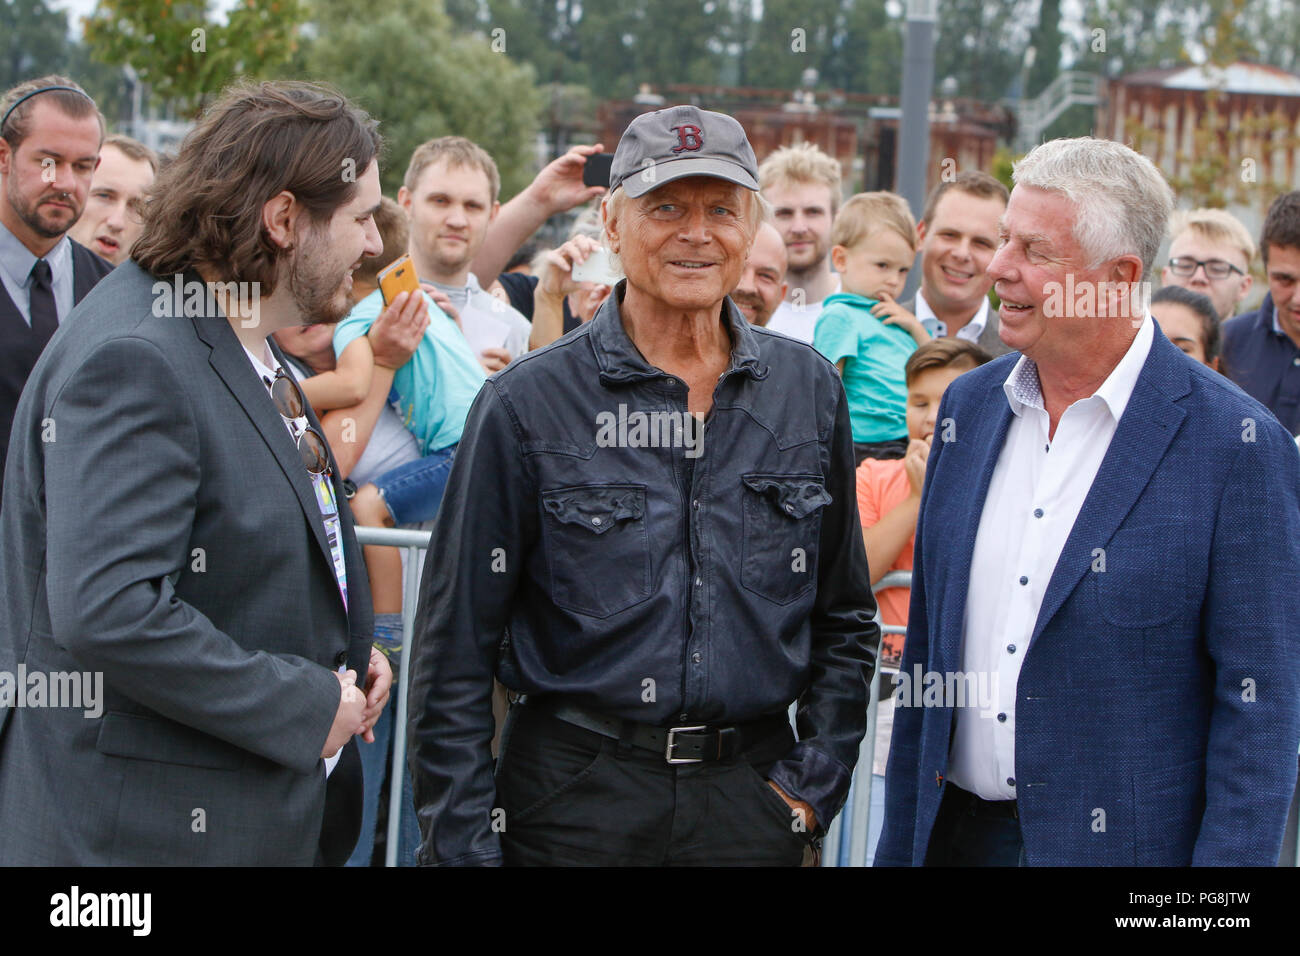 Worms, Germany. 24th August 2018. Actor Peter Englert, who initiated the renaming of the bridge to Terence-Hill-Bridge, Terence Hill and the Lord Mayor of Worms Michael Kissel are pictured from left to right. Italian actor Terence Hill visited the German city of Worms, to present his new movie (My Name is somebody). Terence Hill added the stop in Worms to his movie promotion tour in Germany, to visit a pedestrian bridge, that is unofficially named Terence-Hill-Bridge (officially Karl-Kubel-Bridge). Stock Photo